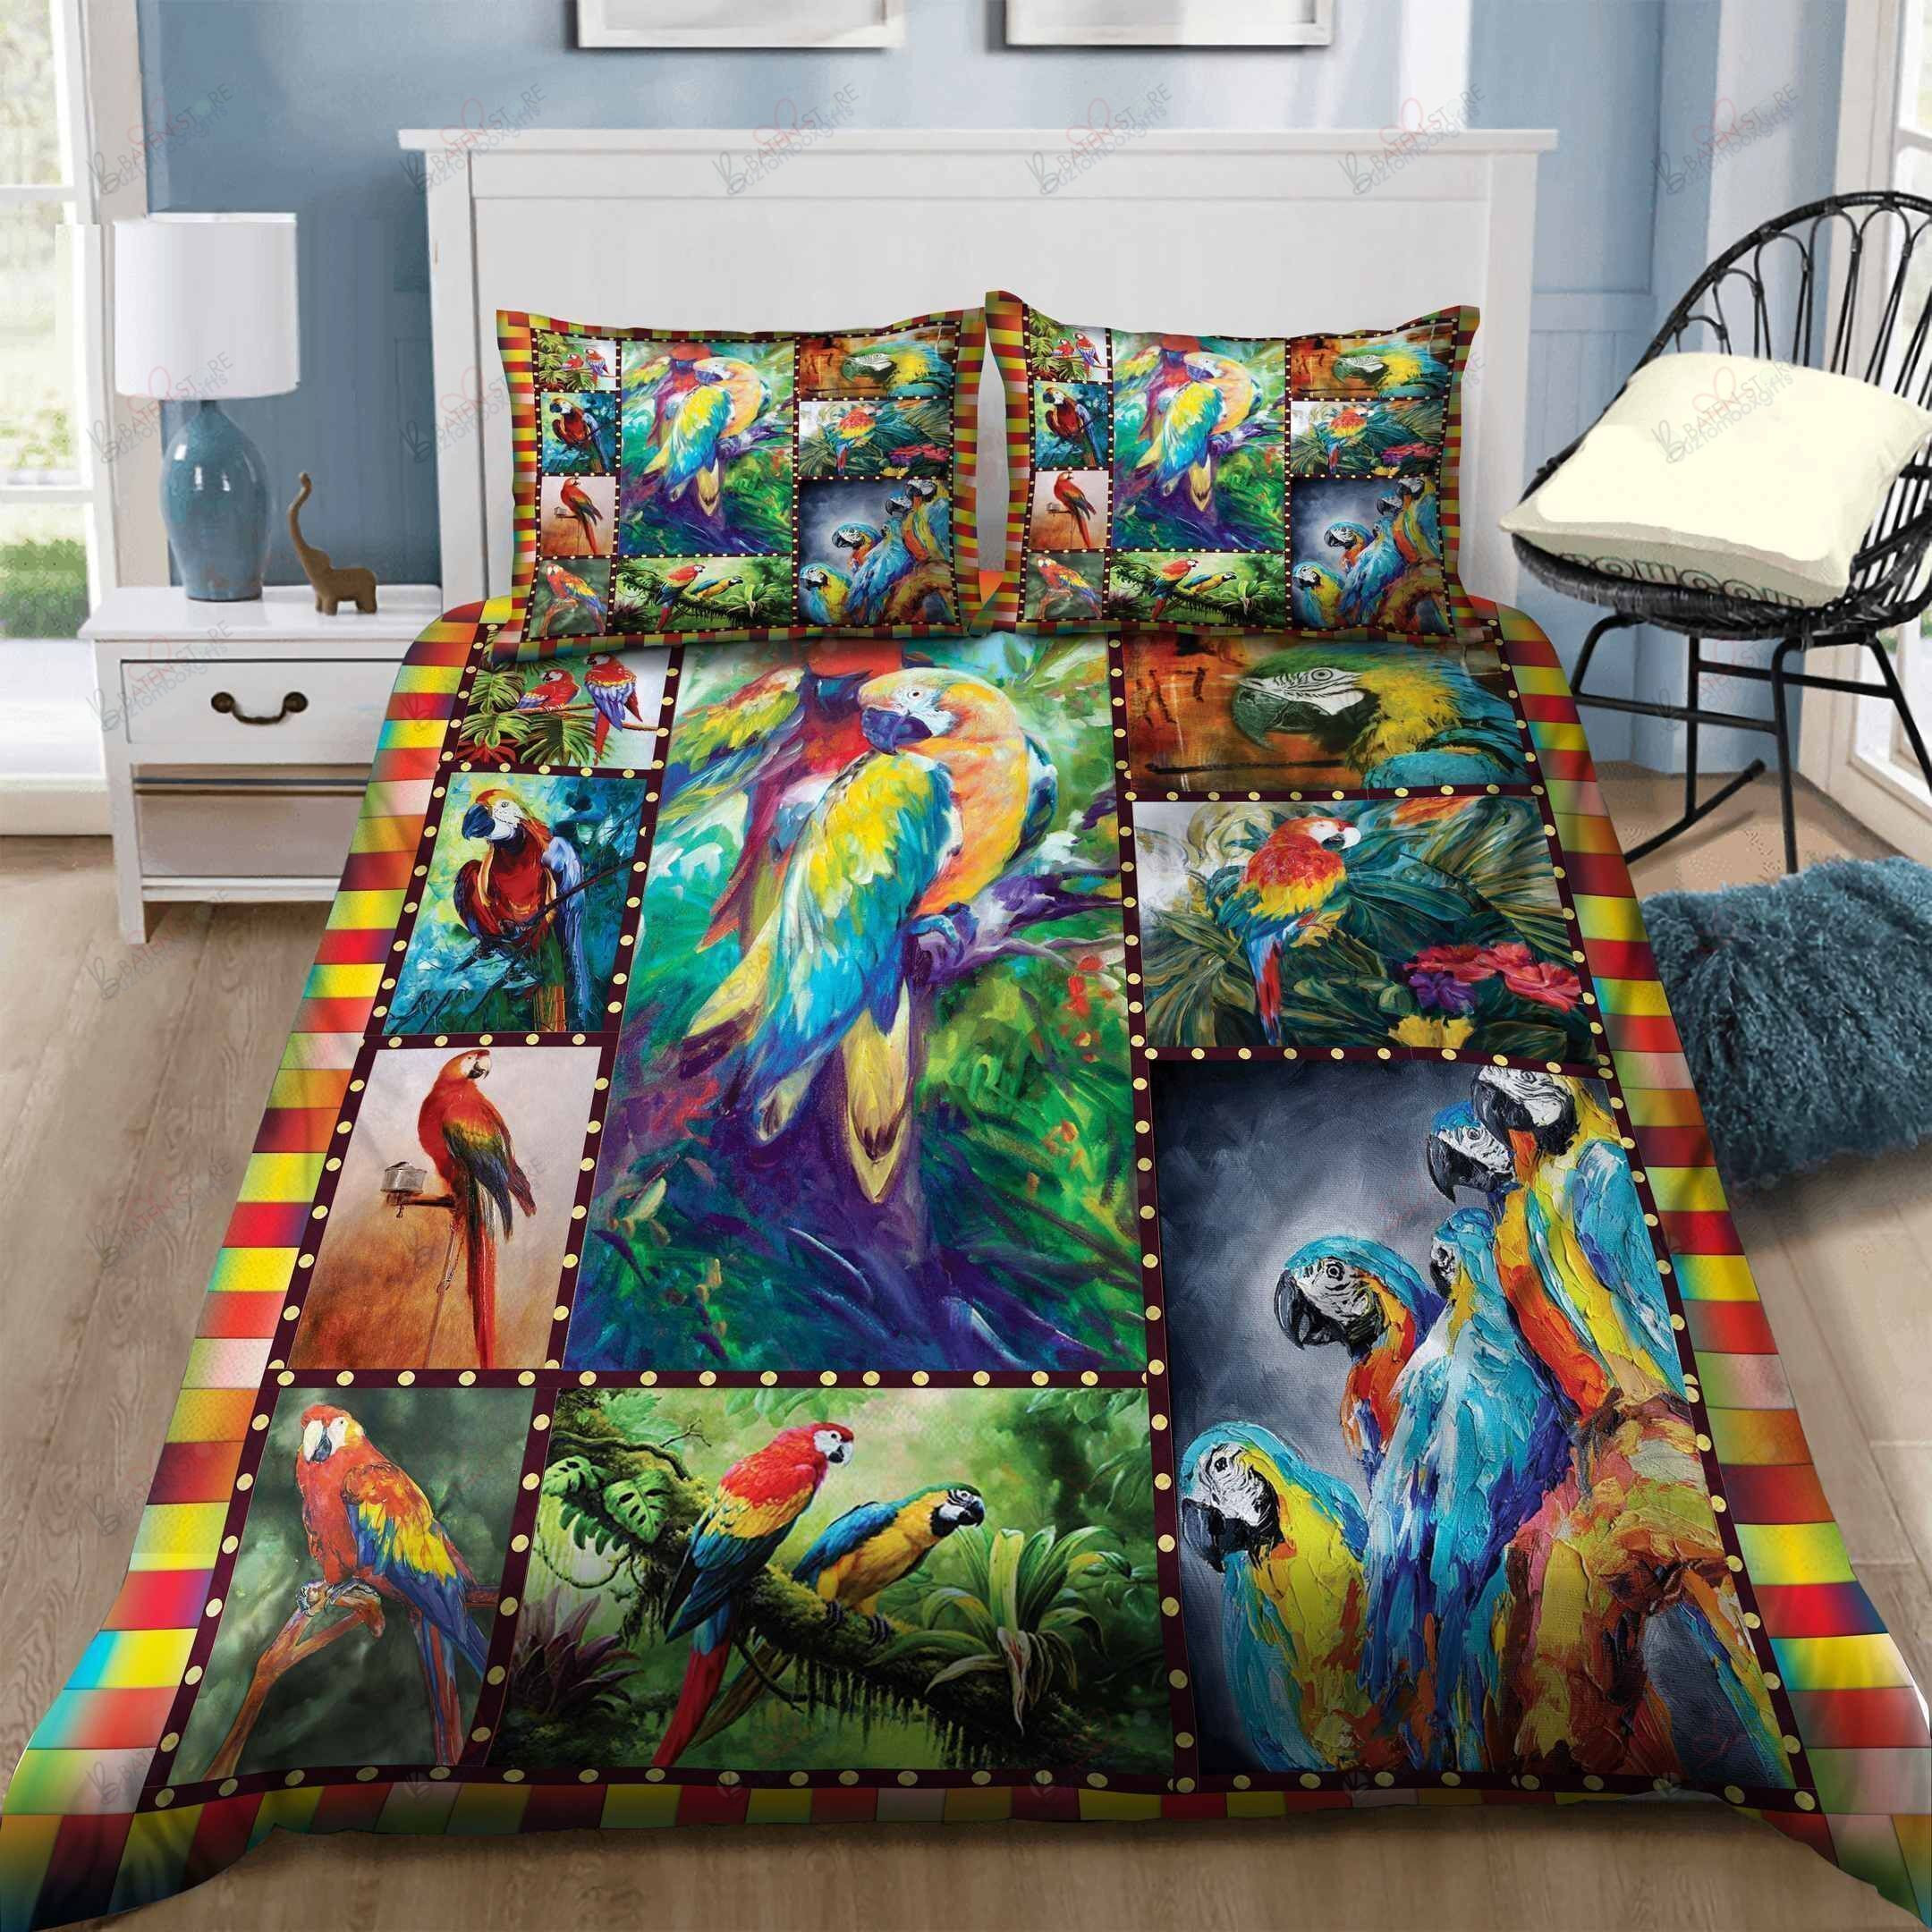 vibrant parrot bedding set with colorful sheets and duvet cover perfect presents for birthdays christmas and thanksgiving qxfgg